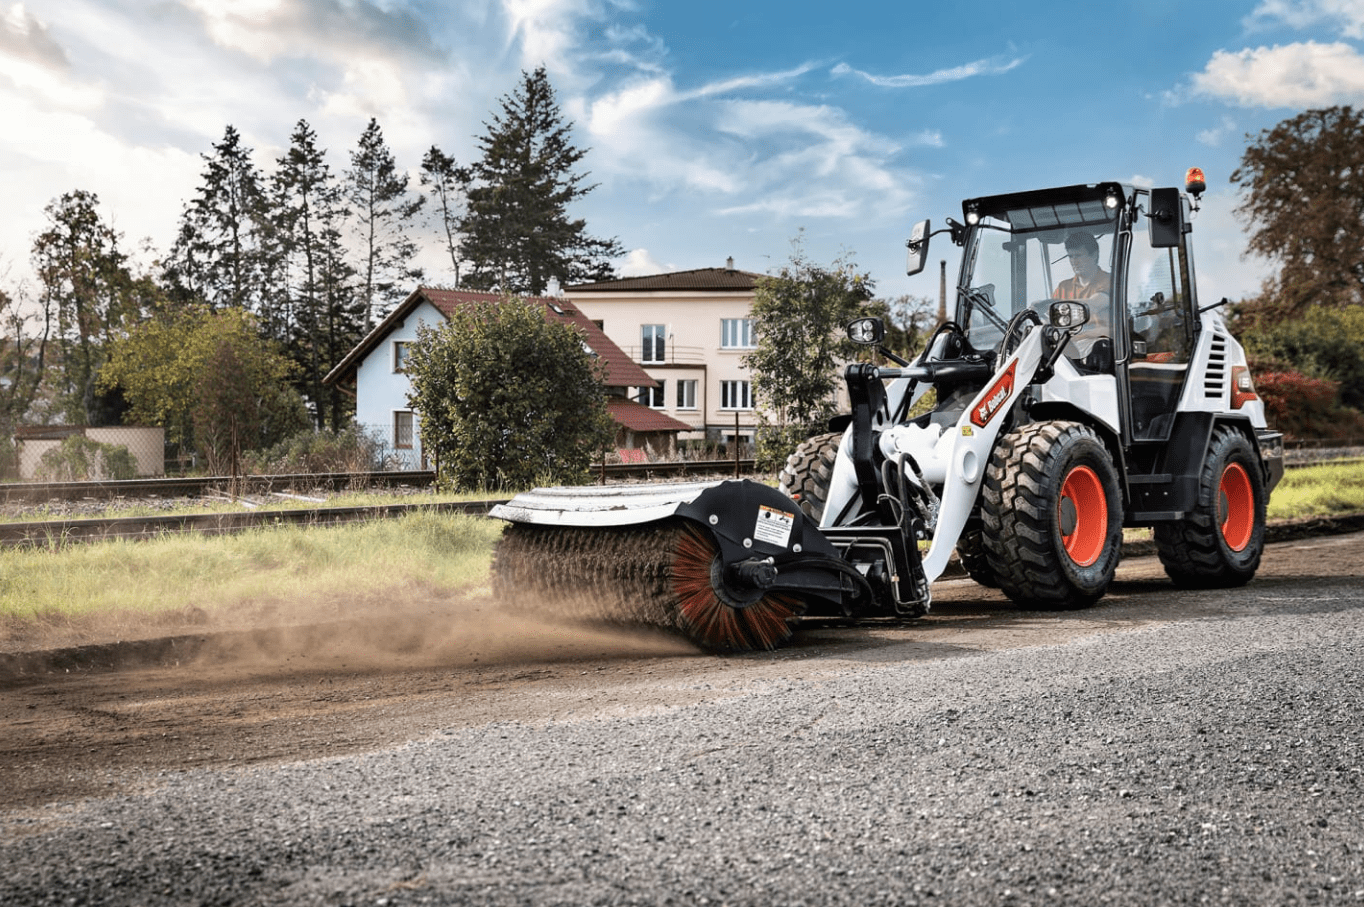 Browse Specs and more for the L85 Compact Wheel Loader - Bobcat of North Texas